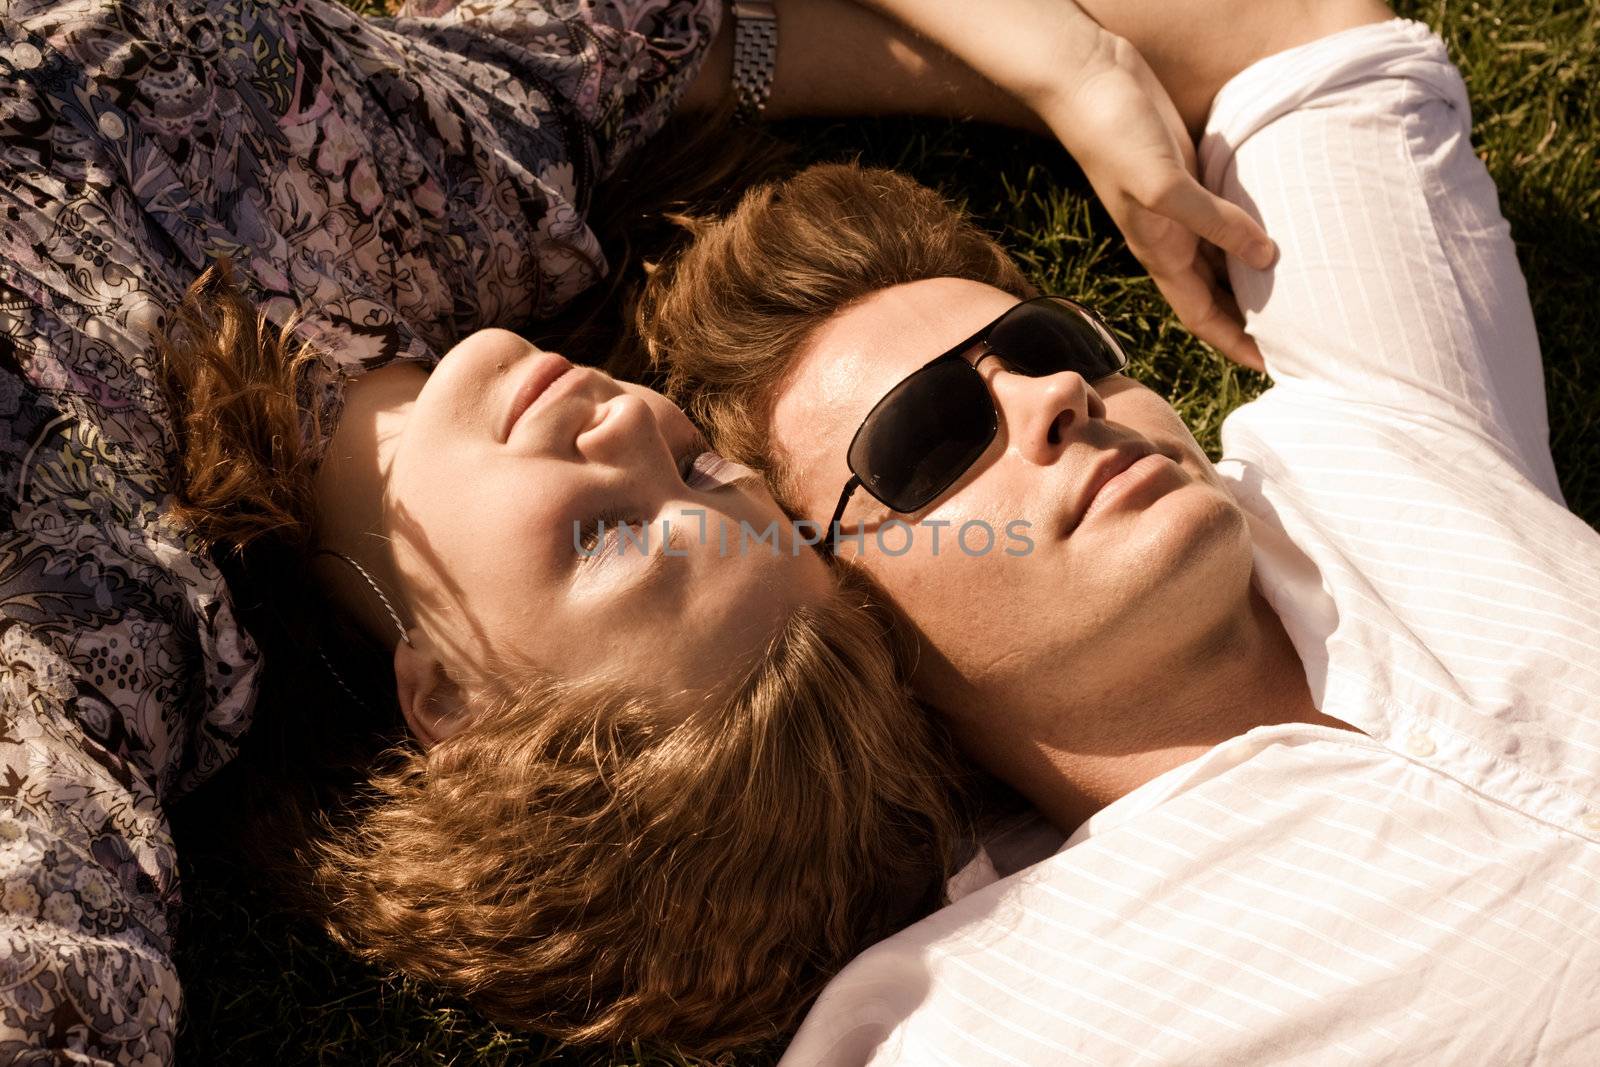 Closeup Of A Couple Lying Close On Grassy Ground